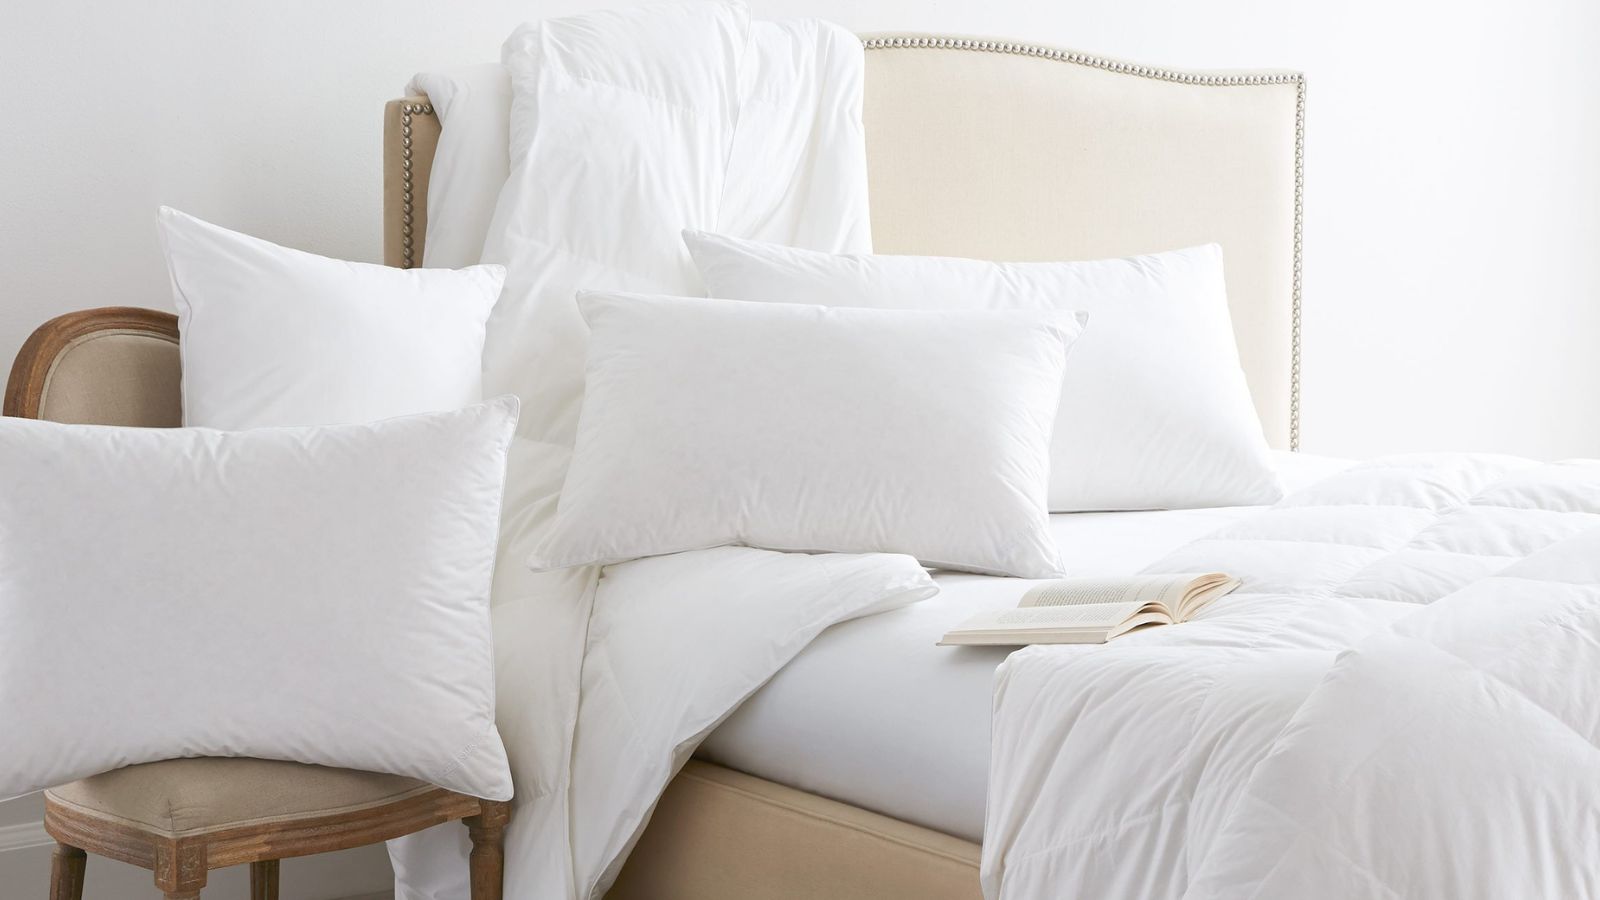 3 Ways to Fluff a Pillow & Why You Should Do So - Boll & Branch